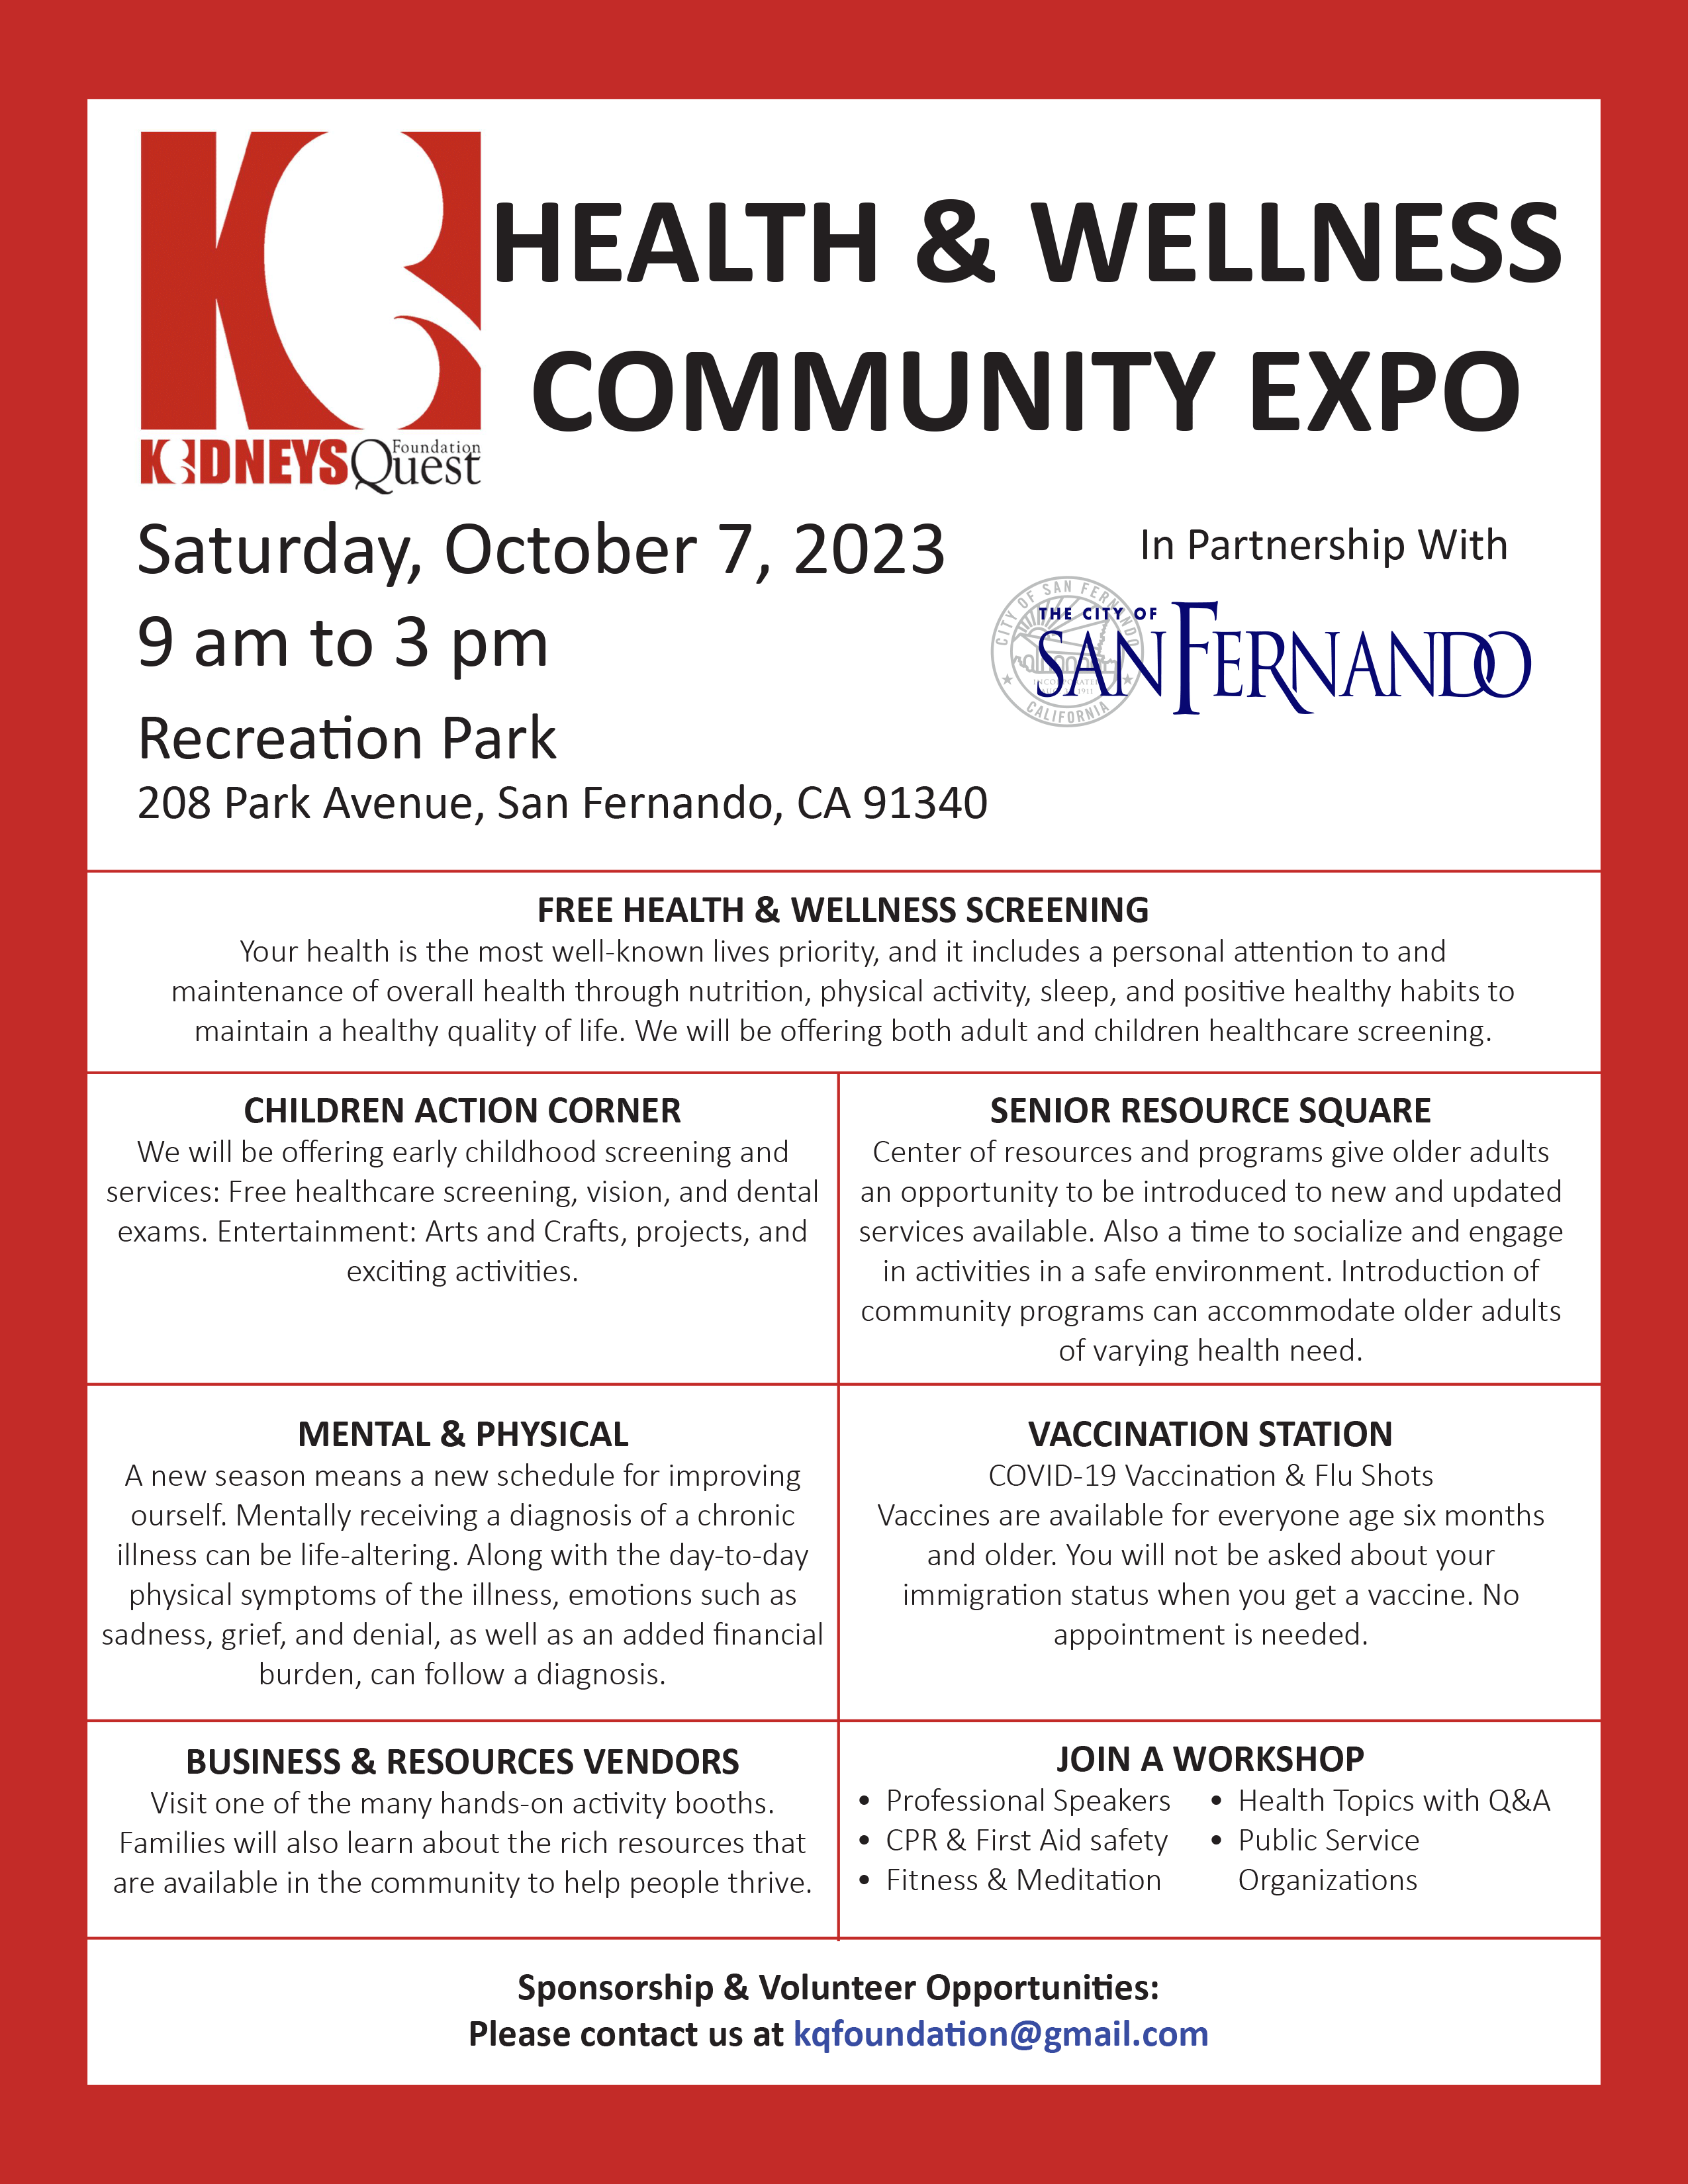 KQF-Health-and-Wellness-Community-Expo-(10-7-23)